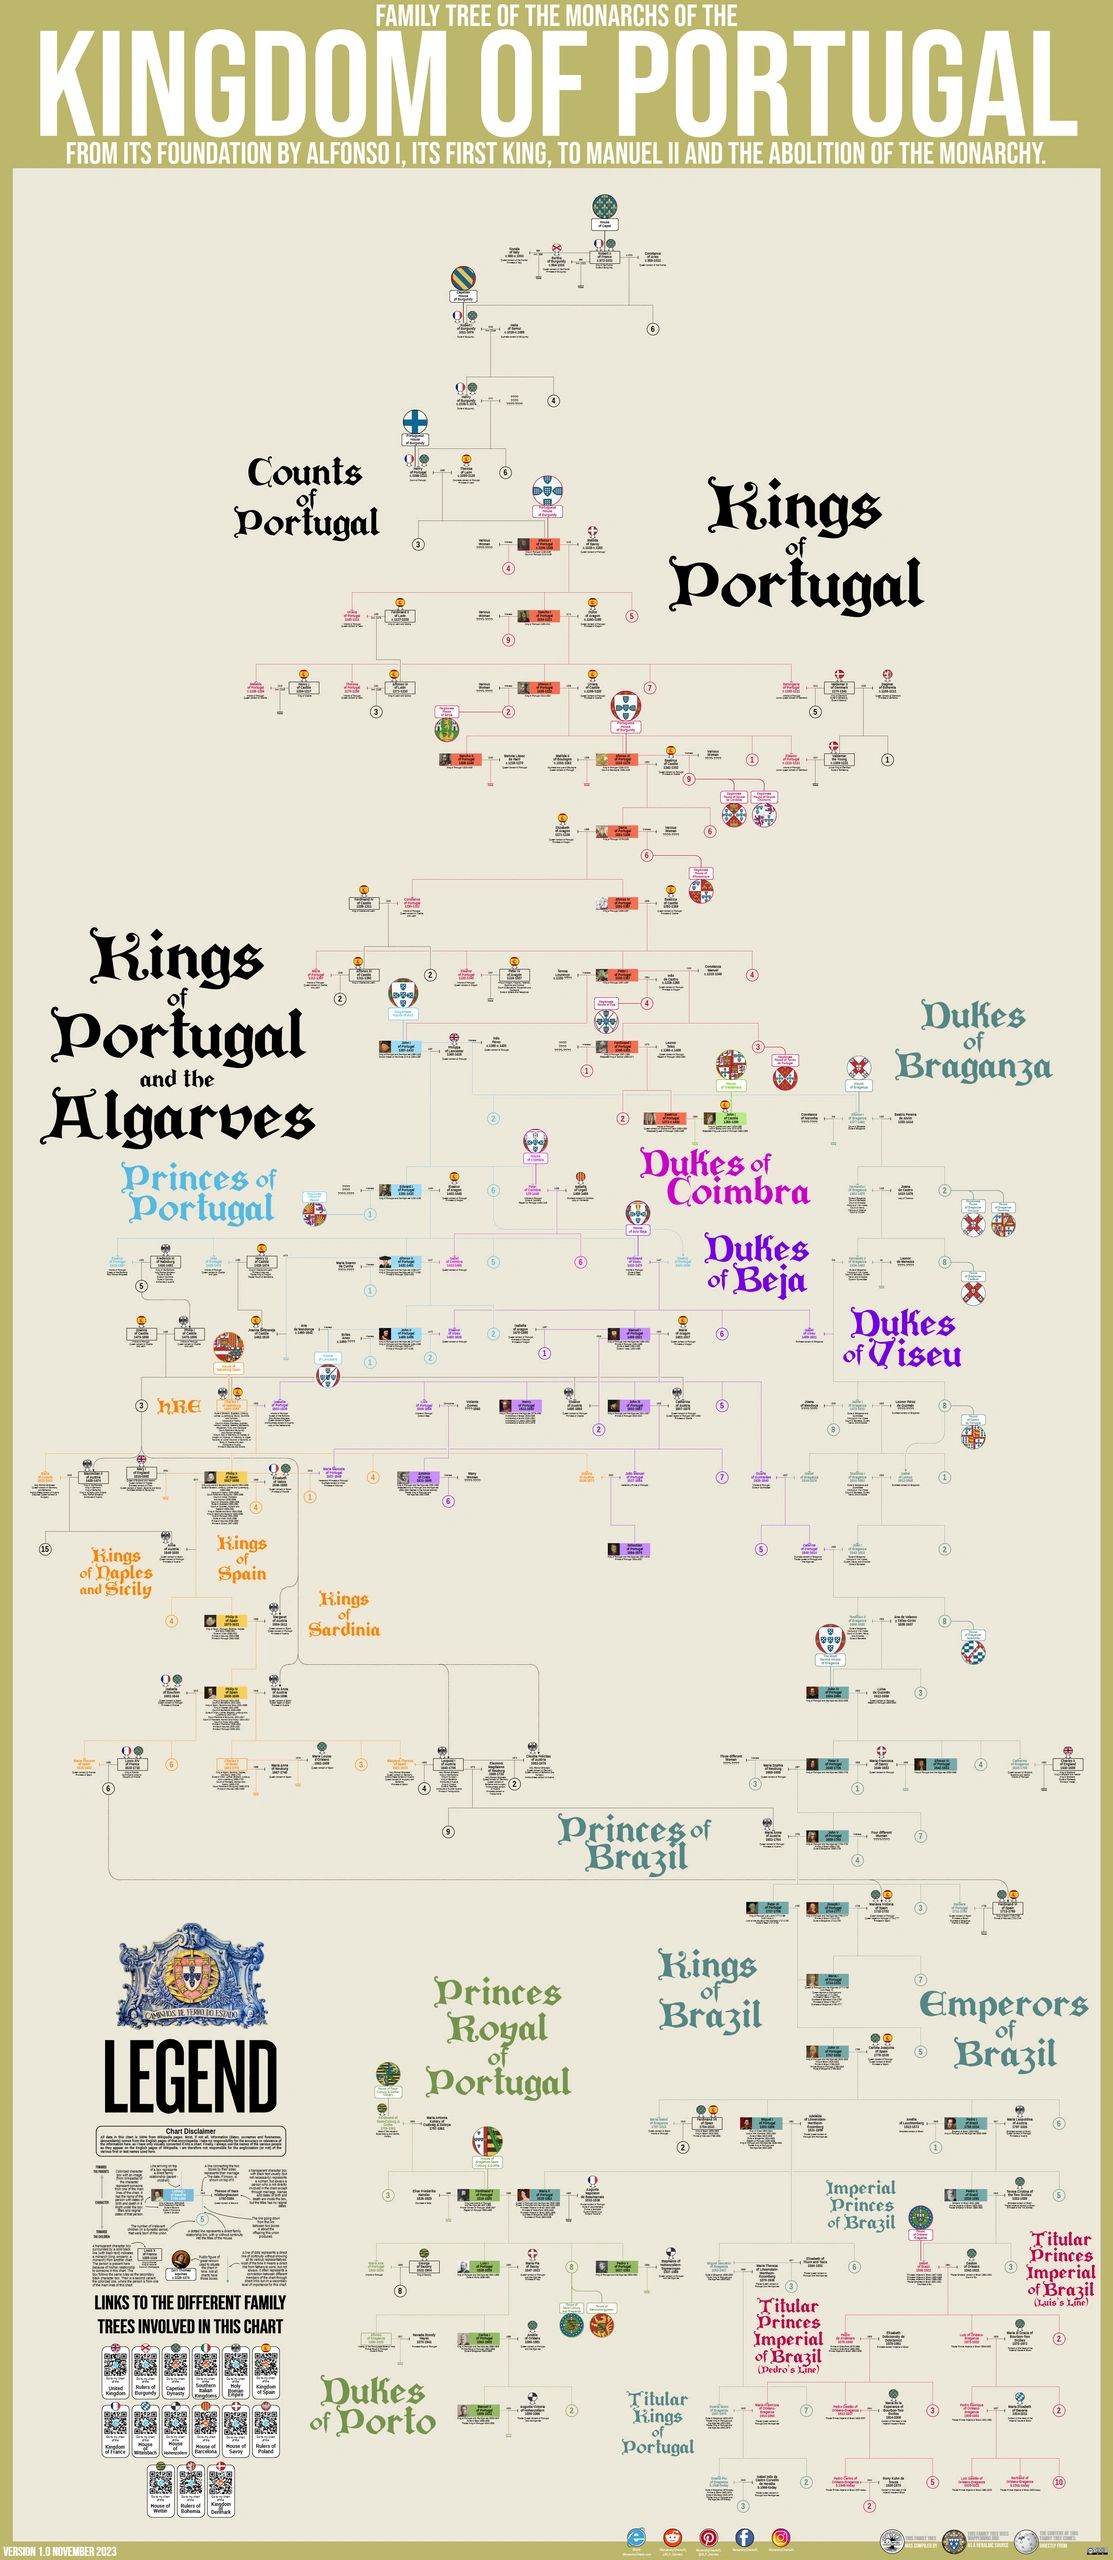 CHART, FAMILY TREE OF THE KINGDOM OF PORTUGAL